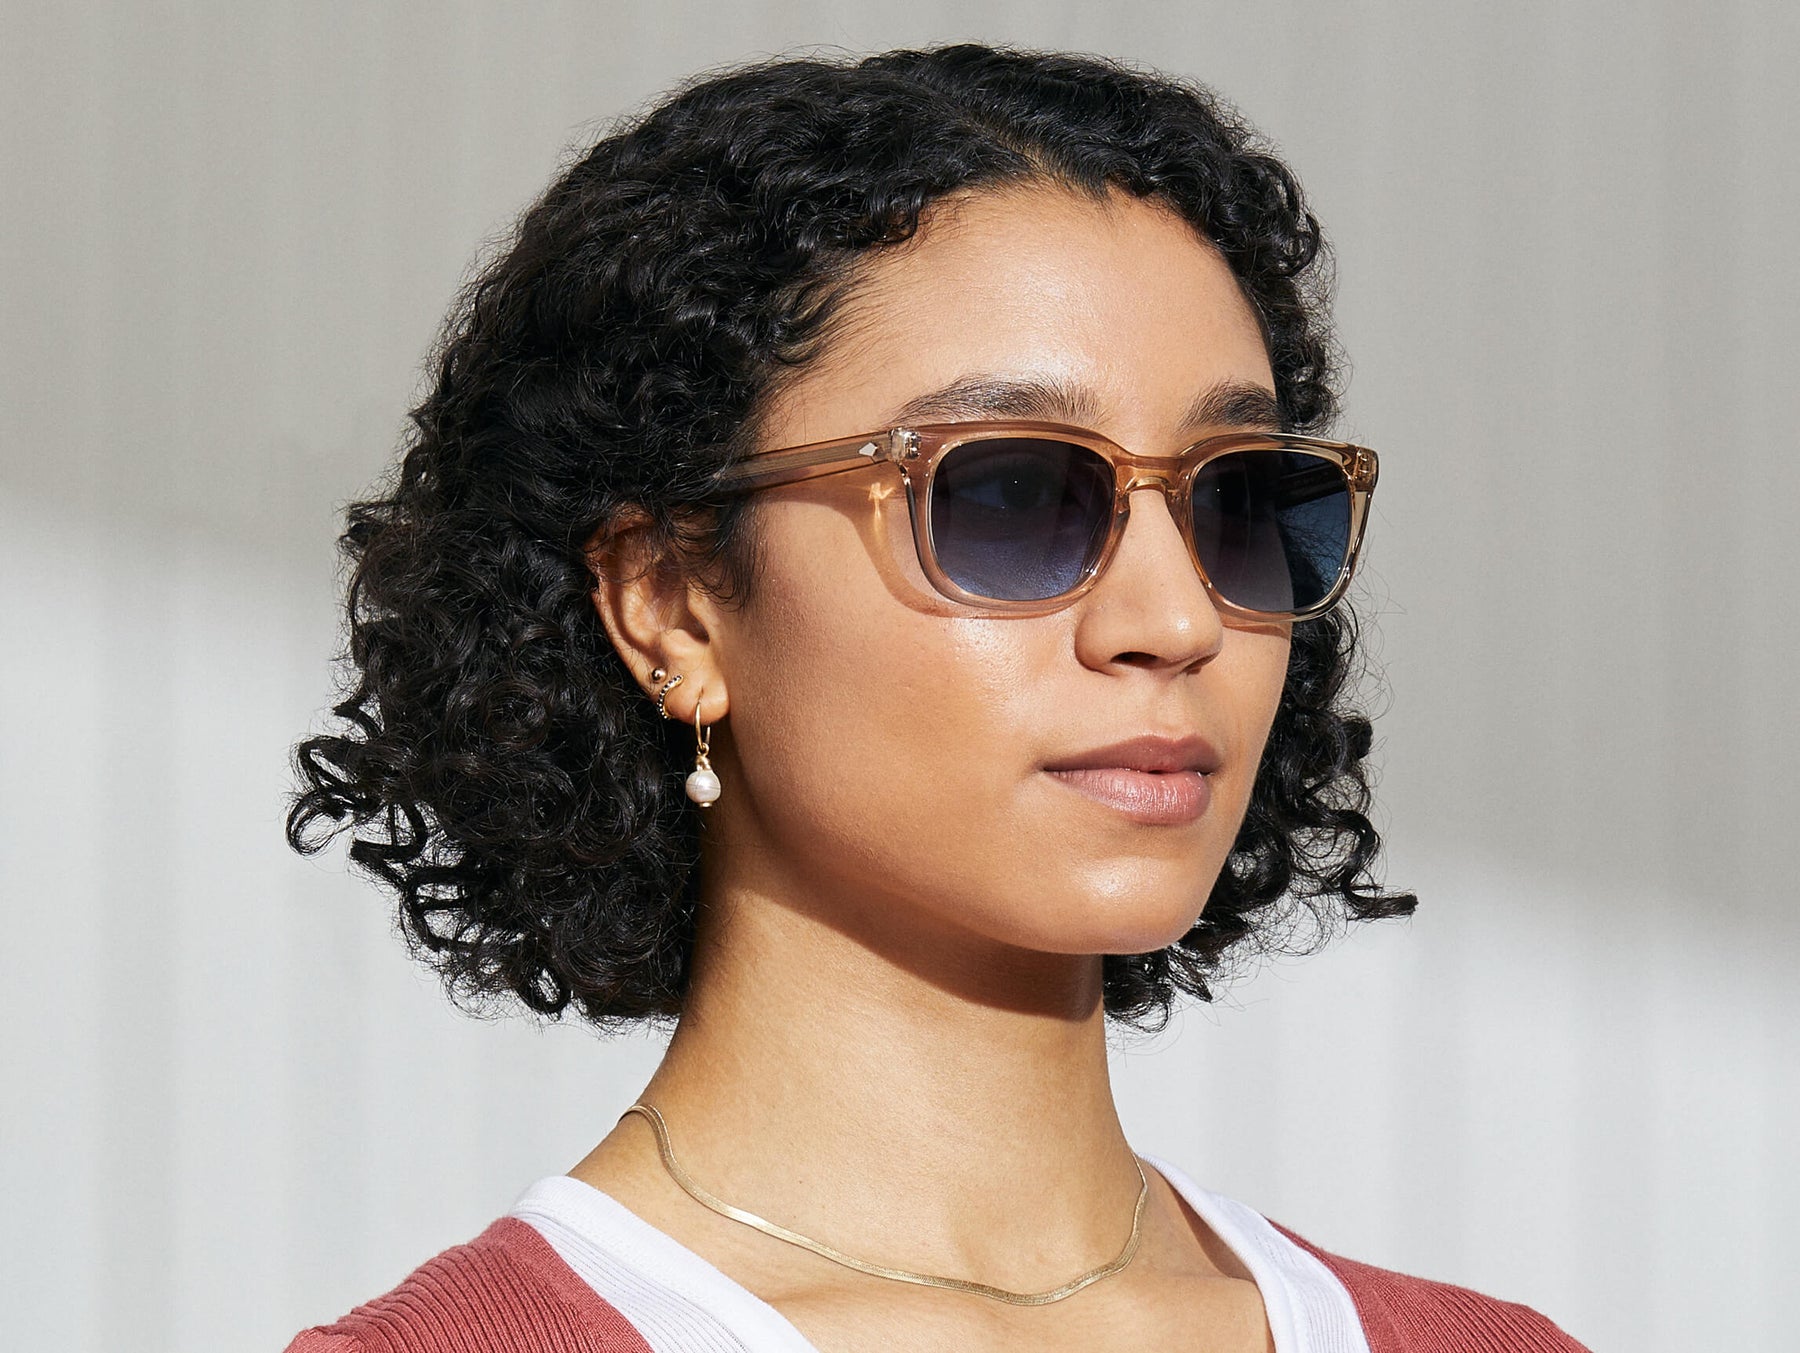 Model is wearing The SHIDDOCK SUN in Cinnamon in size 52 with Denim Blue Tinted Lenses